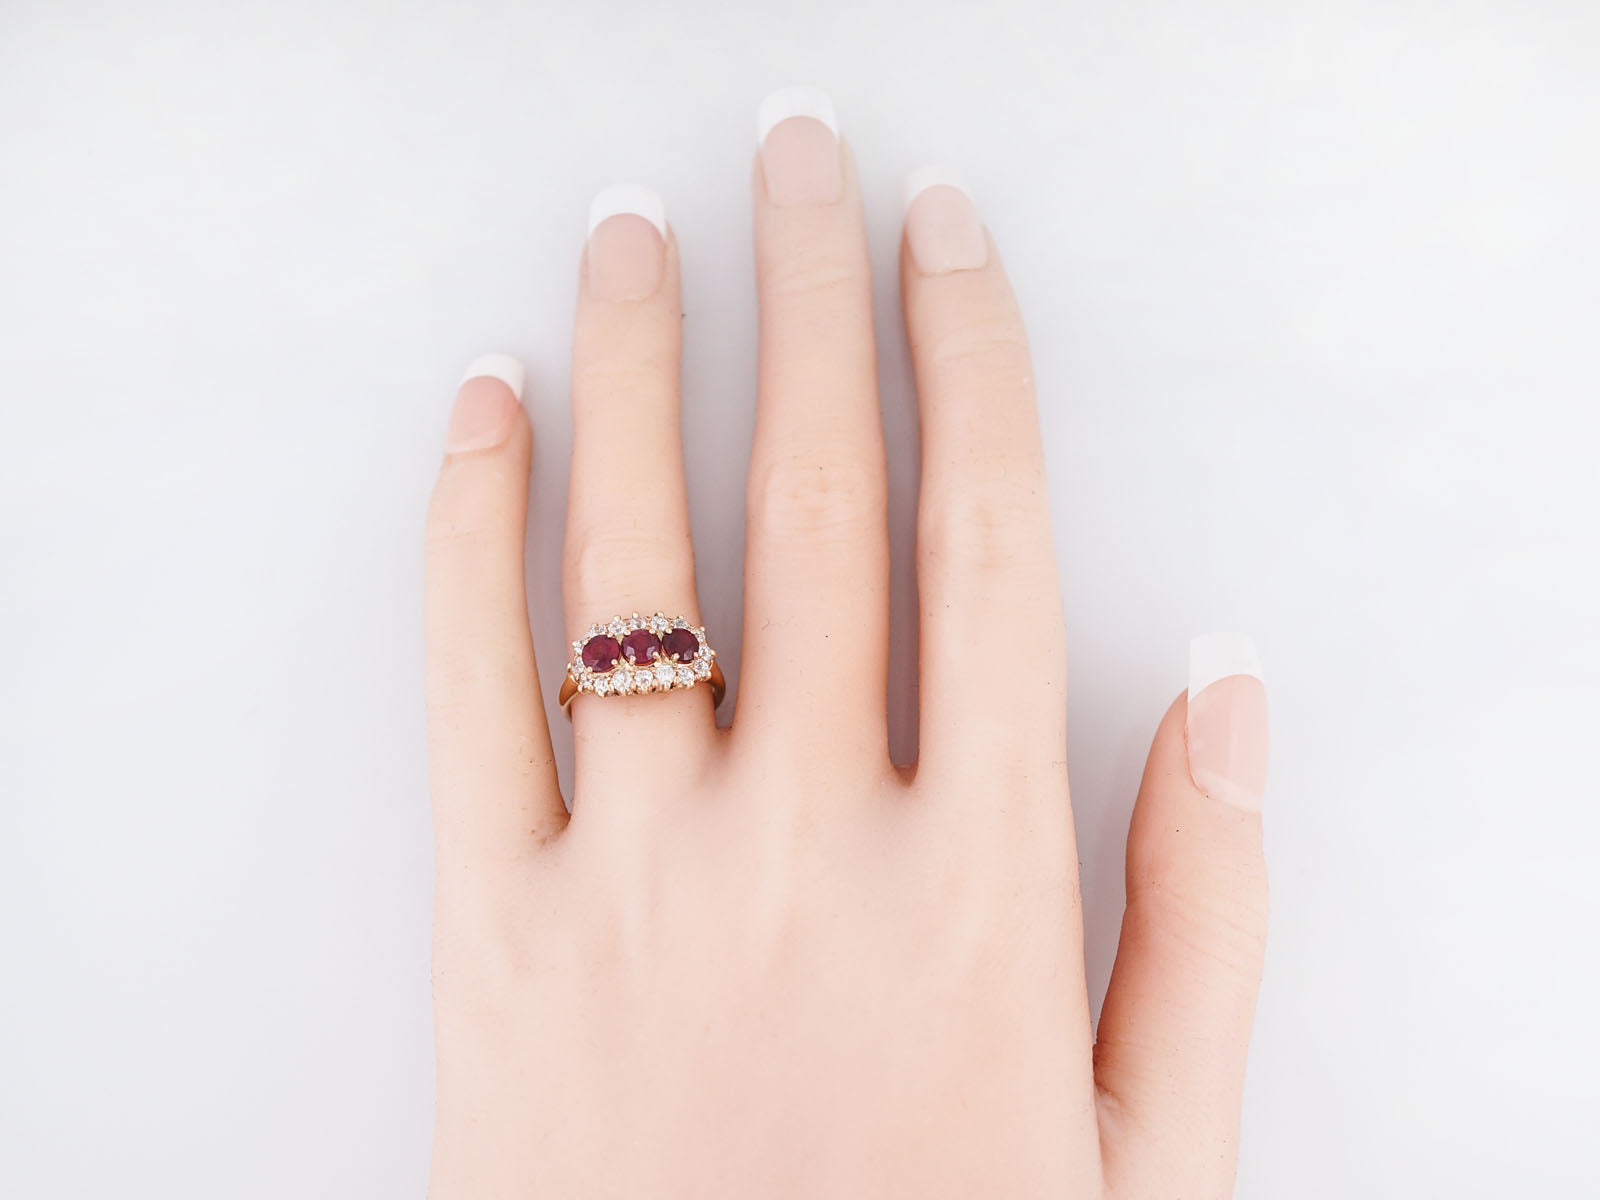 Antique Right Hand Ring Victorian 1.15 Ruby's & .70 Old European Cut Diamonds in 14k Yellow Gold